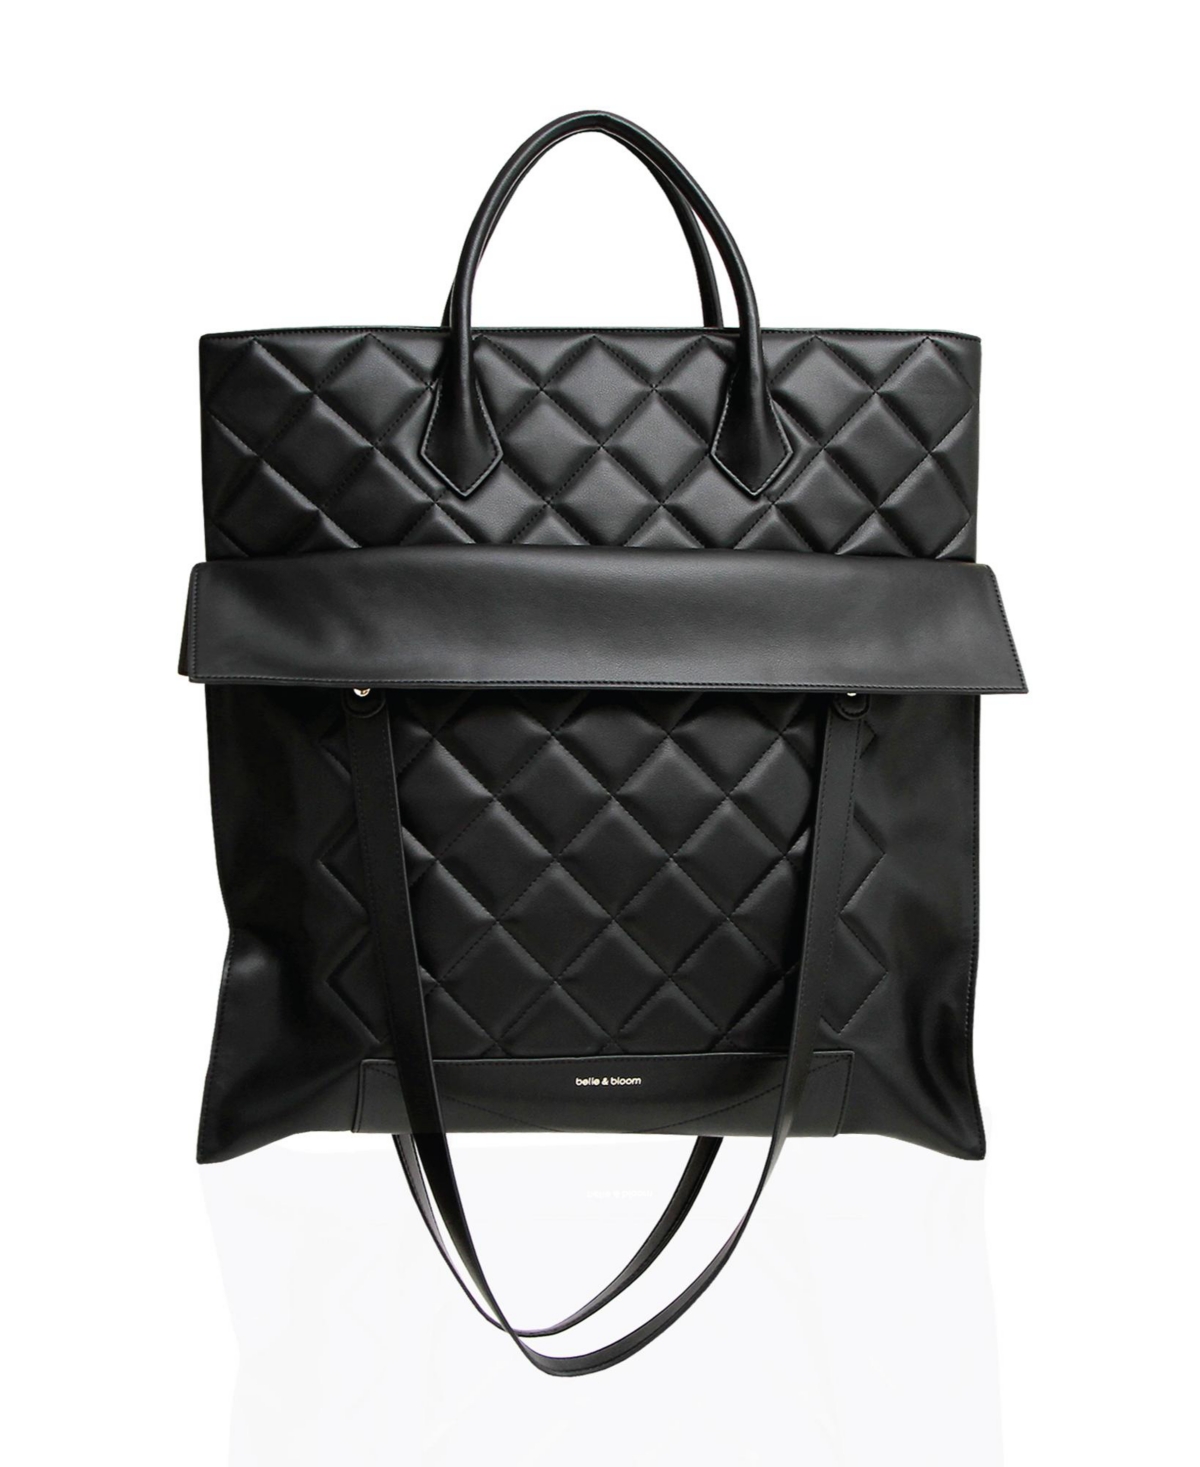 Women Belle & Bloom Lost Lovers Quilted Leather Tote - Black